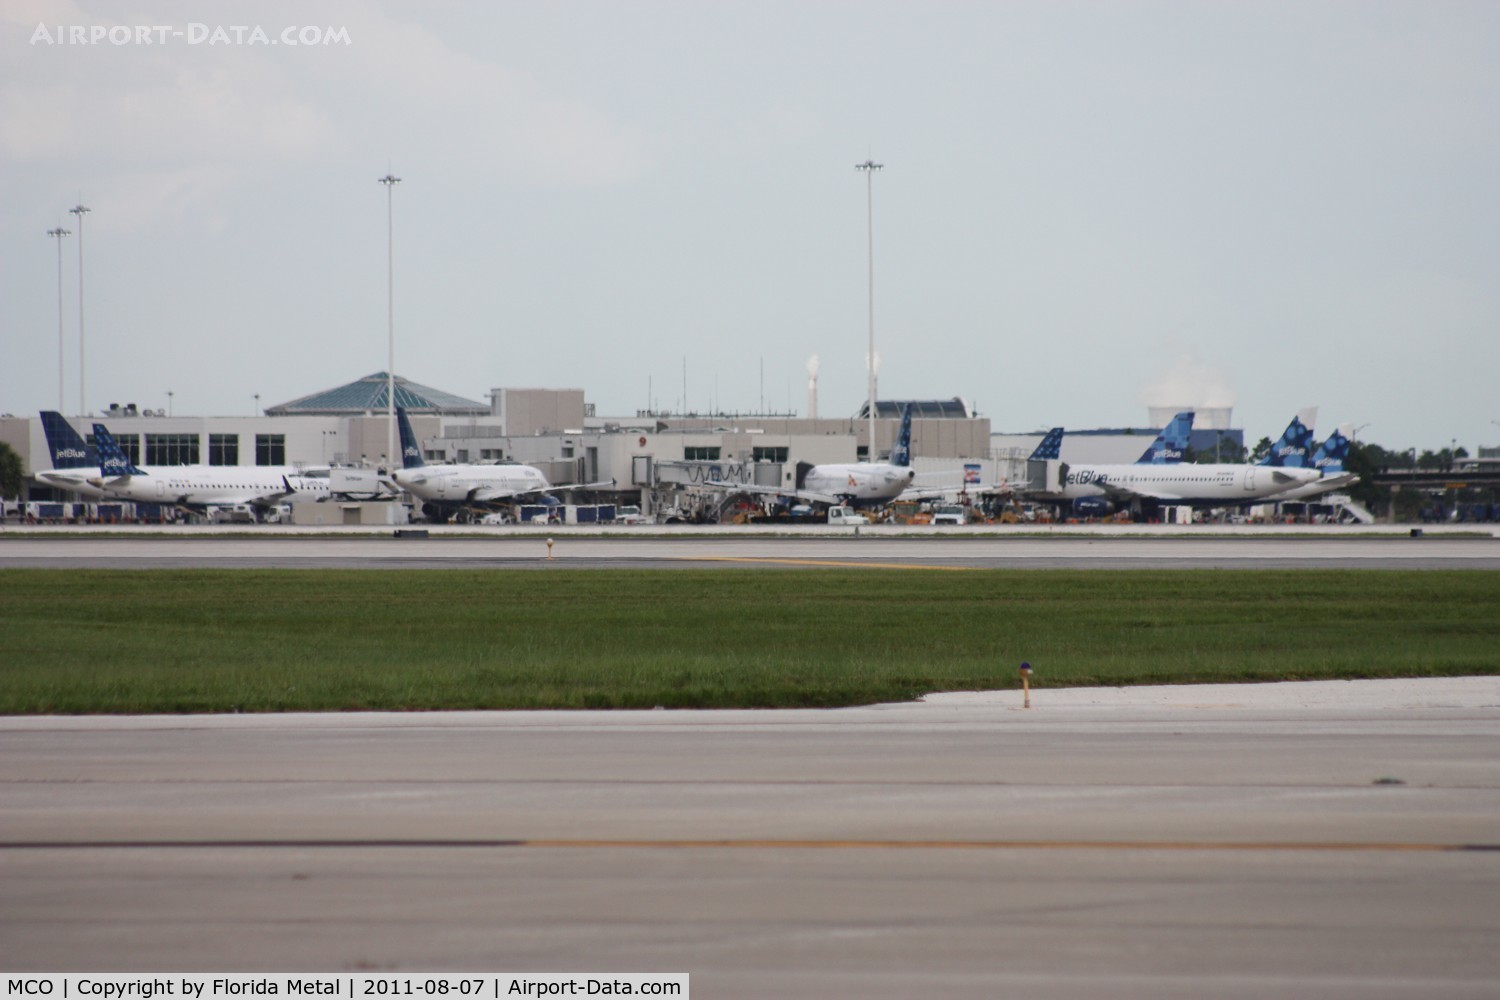 Orlando International Airport (MCO) - Airside 1 with Jet Blue